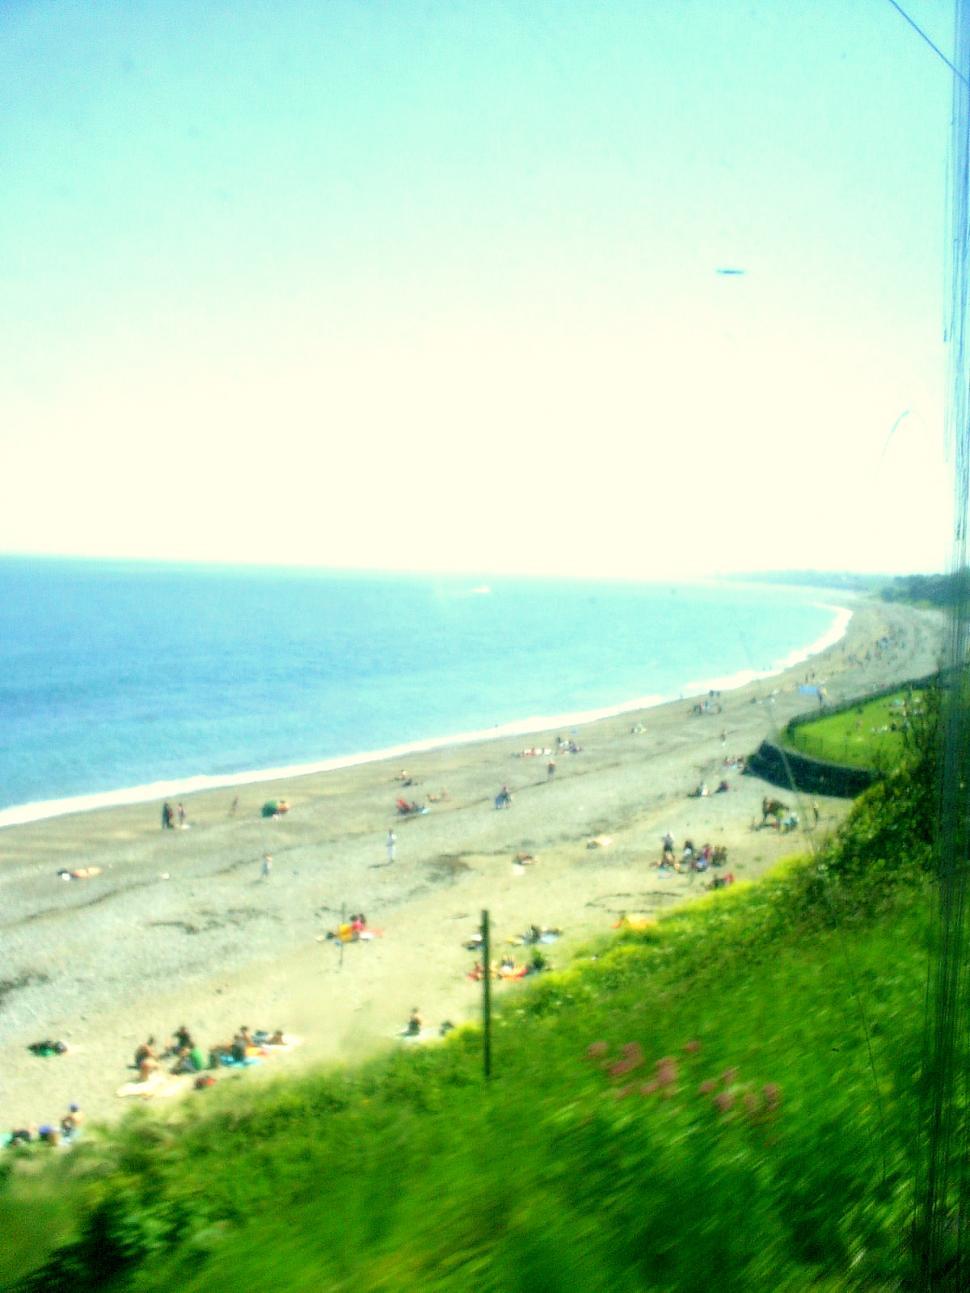 Free Image of beach with blurry, dreamy effect 